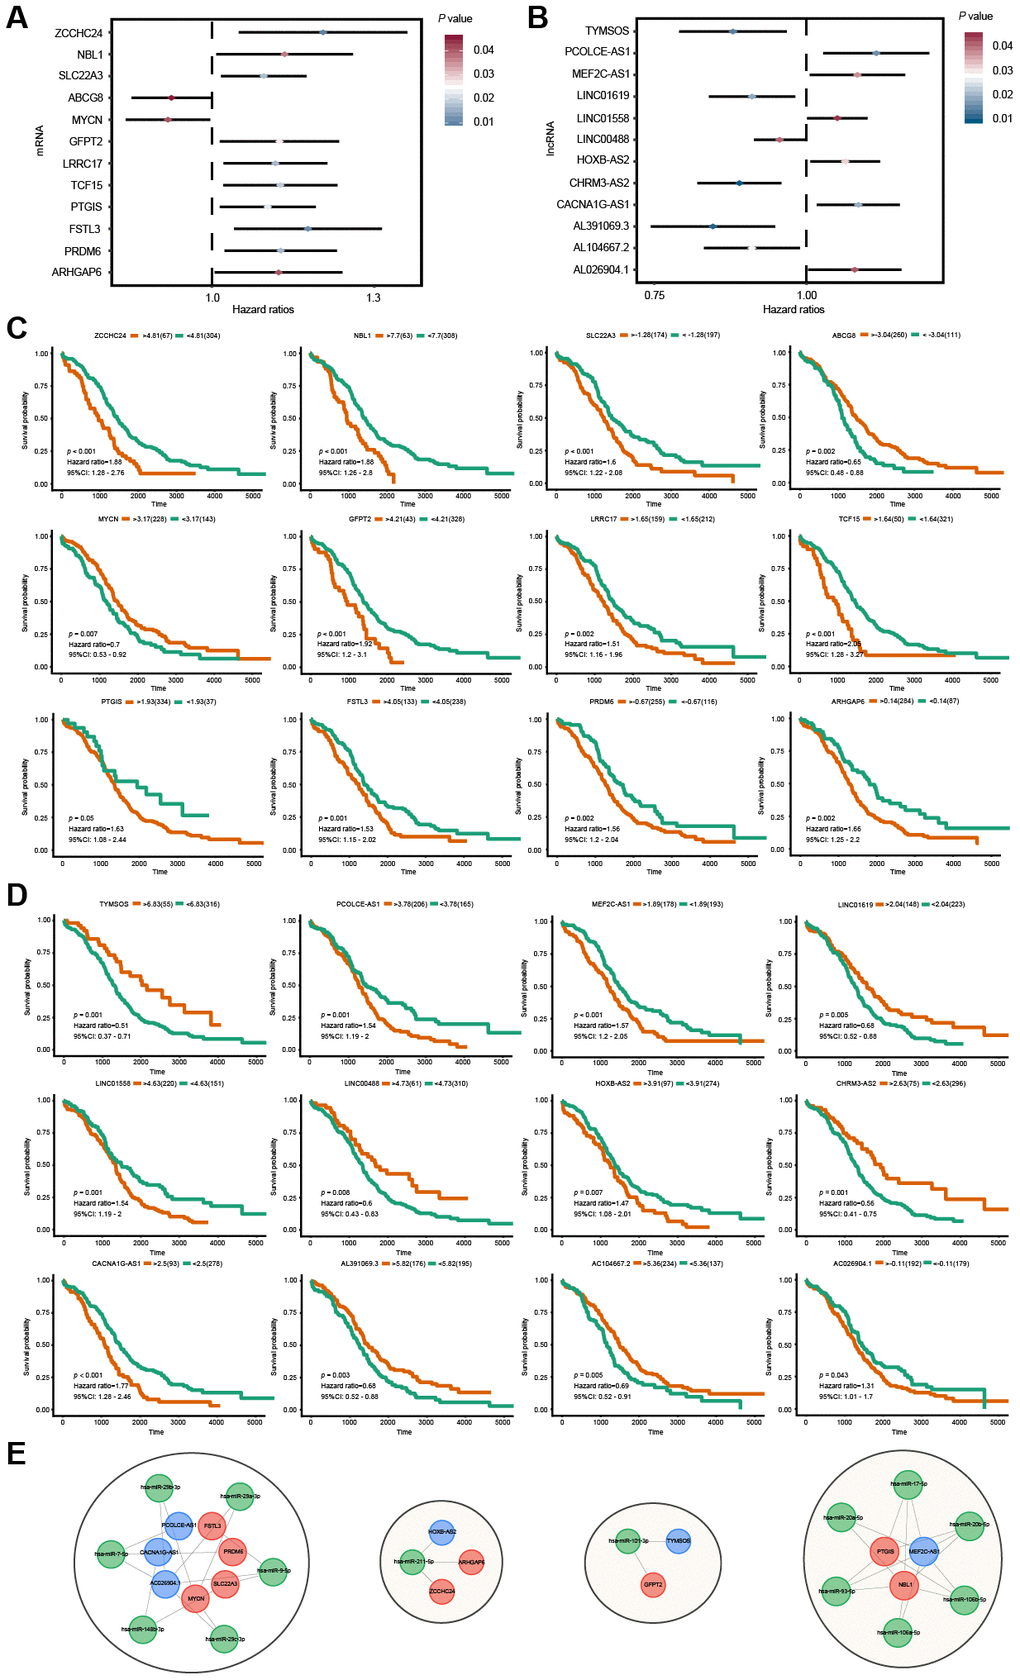 Survival analysis for lncRNAs and mRNAs in the ceRNA network. (A, B) Forest plots of hazard ratios (HR) of survival-associated mRNAs and lncRNAs in the ceRNA regulatory network. (C, D) Kaplan-Meier survival curves for mRNAs and lncRNAs. The horizontal axis indicates the overall survival time in days, and the vertical axis shows the survival rate. (E) The OS-specific ceRNA sub-network. The lncRNAs, miRNAs and mRNAs are indicated as blue, green and red, respectively.